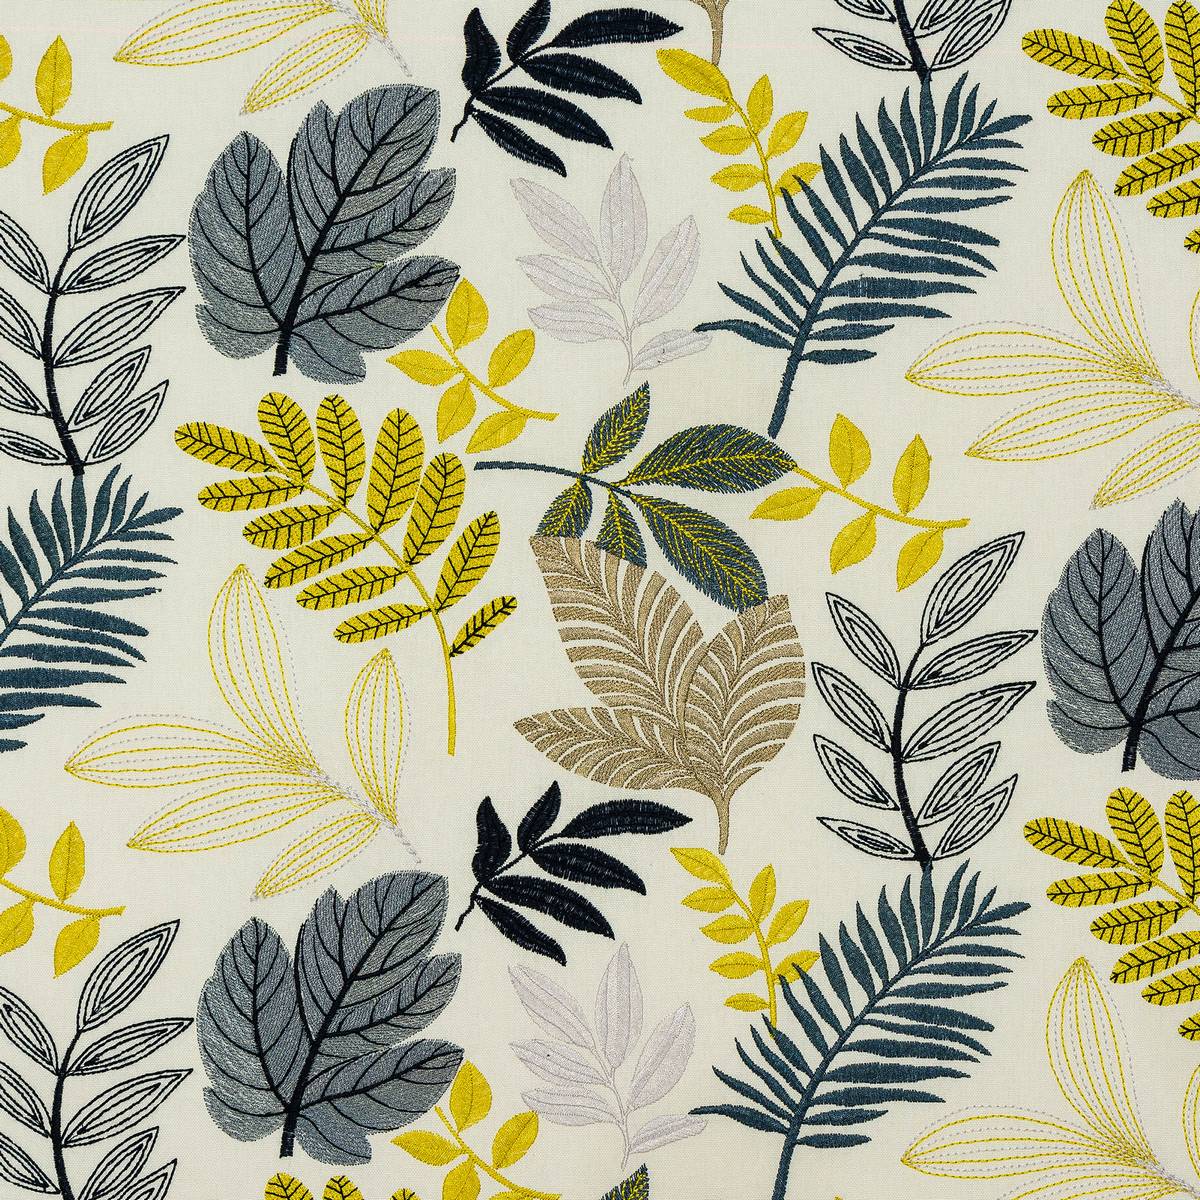 Heligan Dove Fabric by Porter & Stone